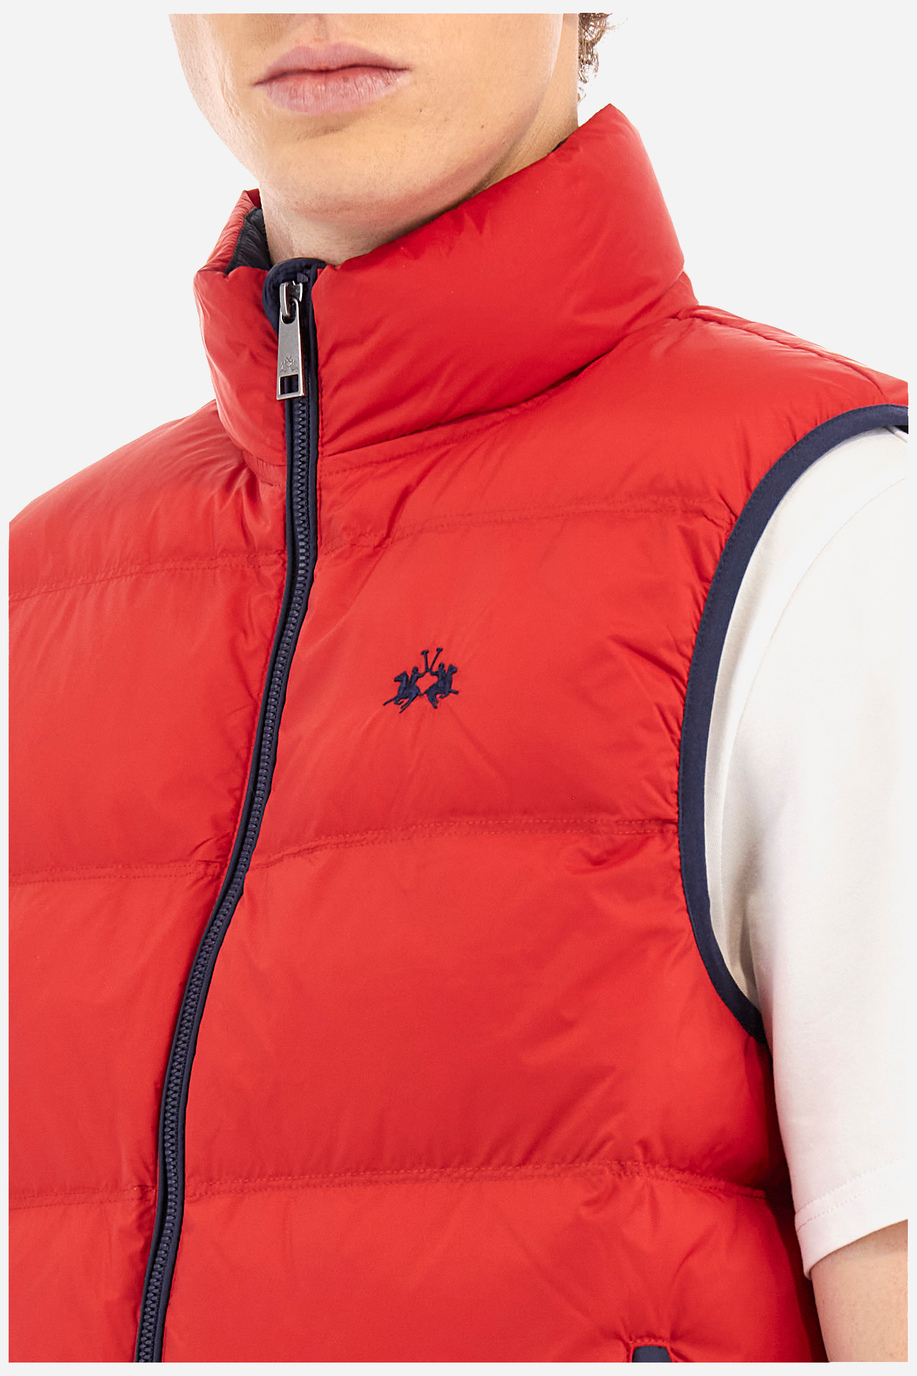 Man gilet in regular fit - Winniefred - Outerwear and Jackets | La Martina - Official Online Shop